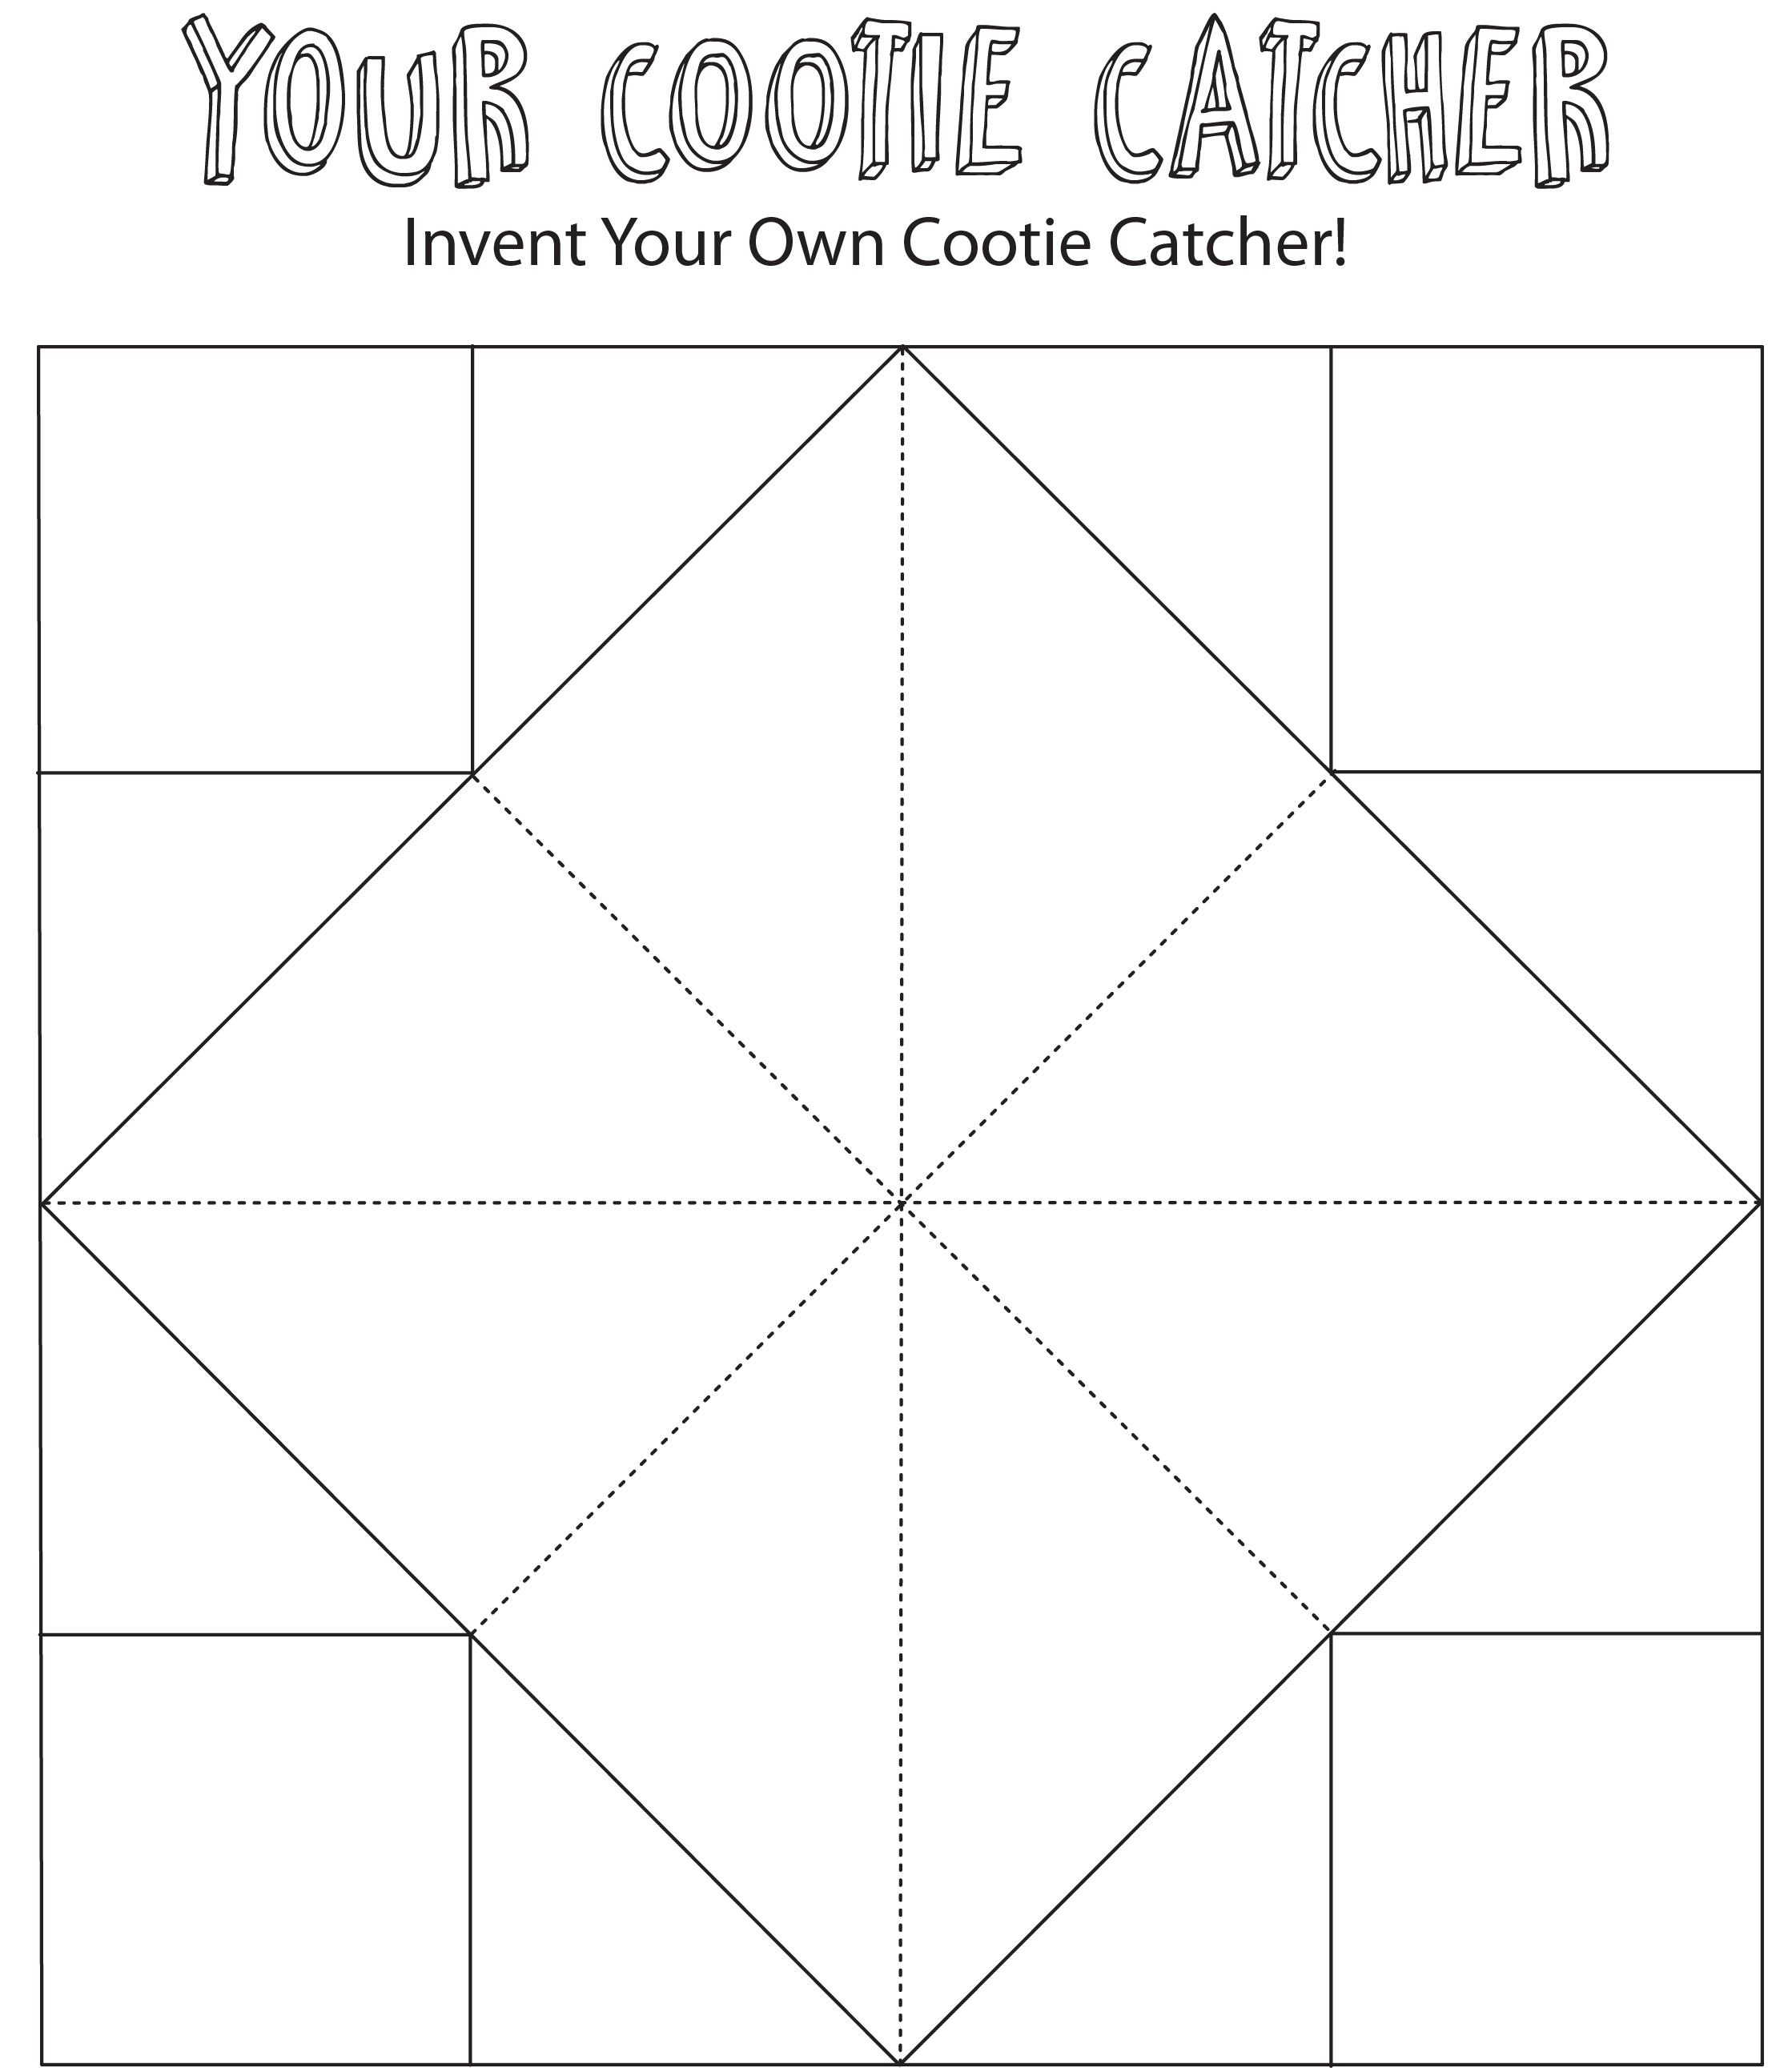 How To Play The Cootie Catcher Drawing Game Fun For Kids Who Love To Draw Step By Step